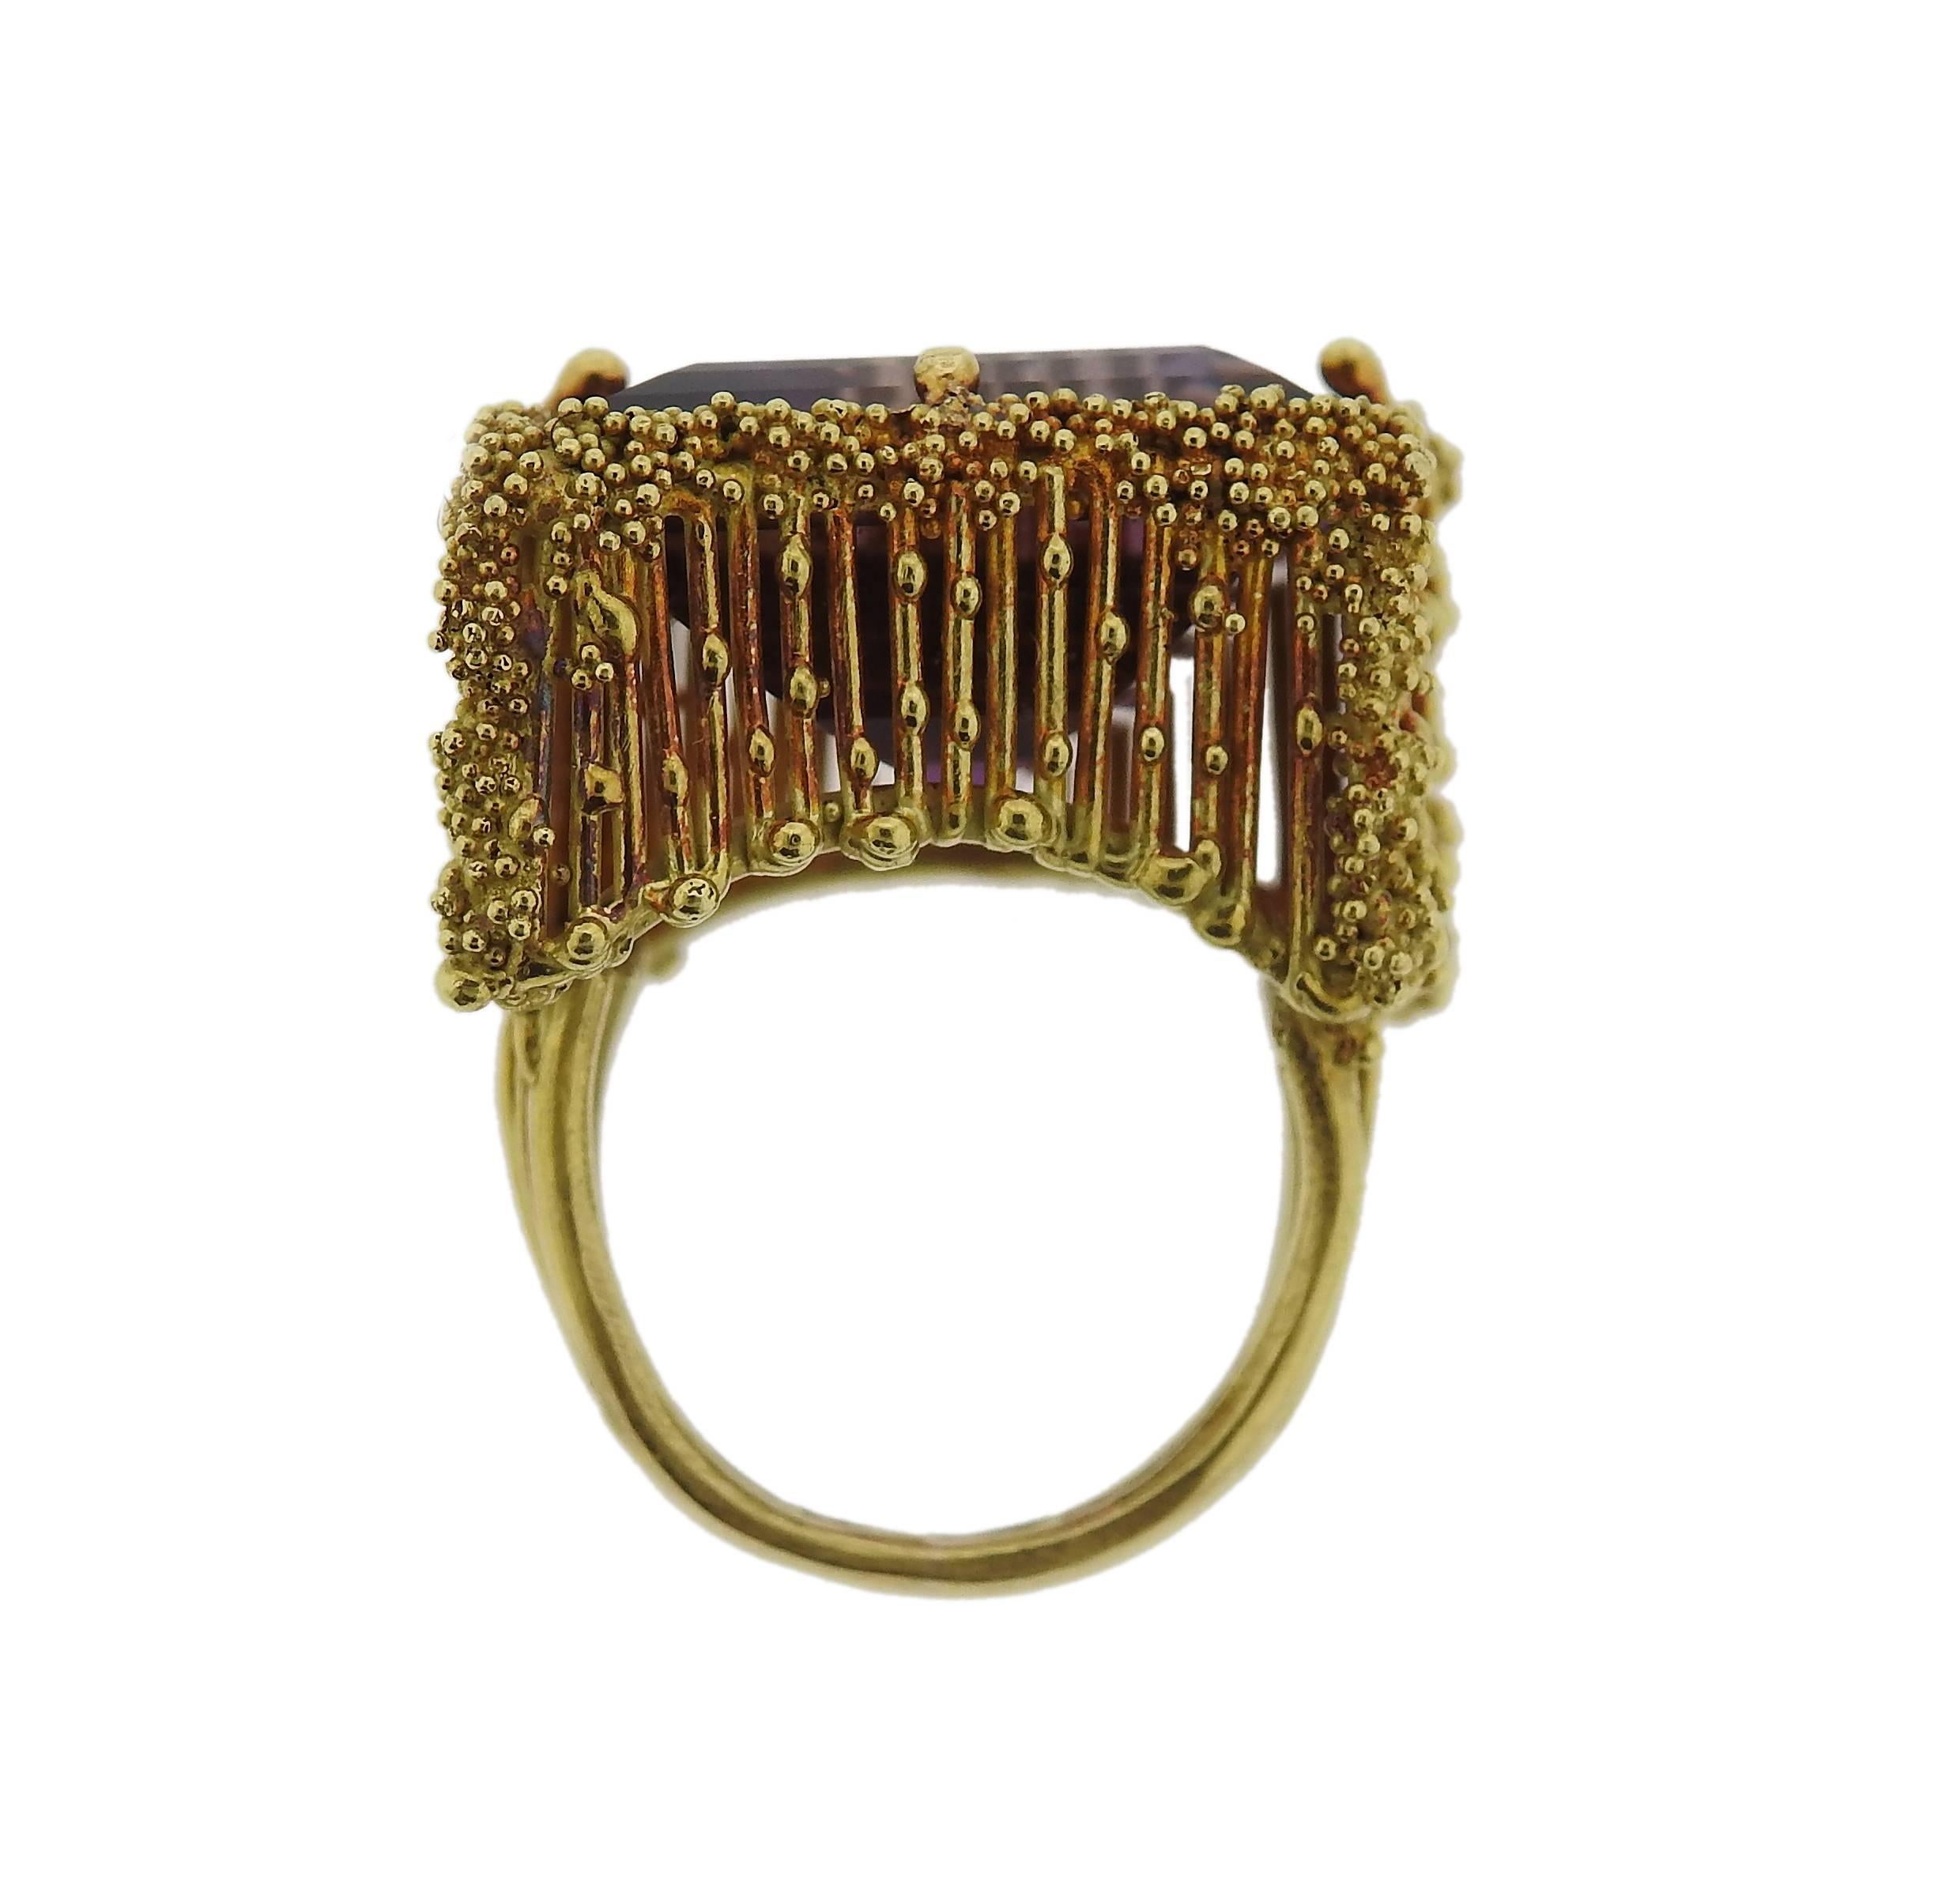 Circa 1970s vintage 18k yellow gold ring, featuring 19mm x 19mm ametrine. Ring size - 5 1/2, ring top is 23mm x 23mm and weighs 23.1 grams 